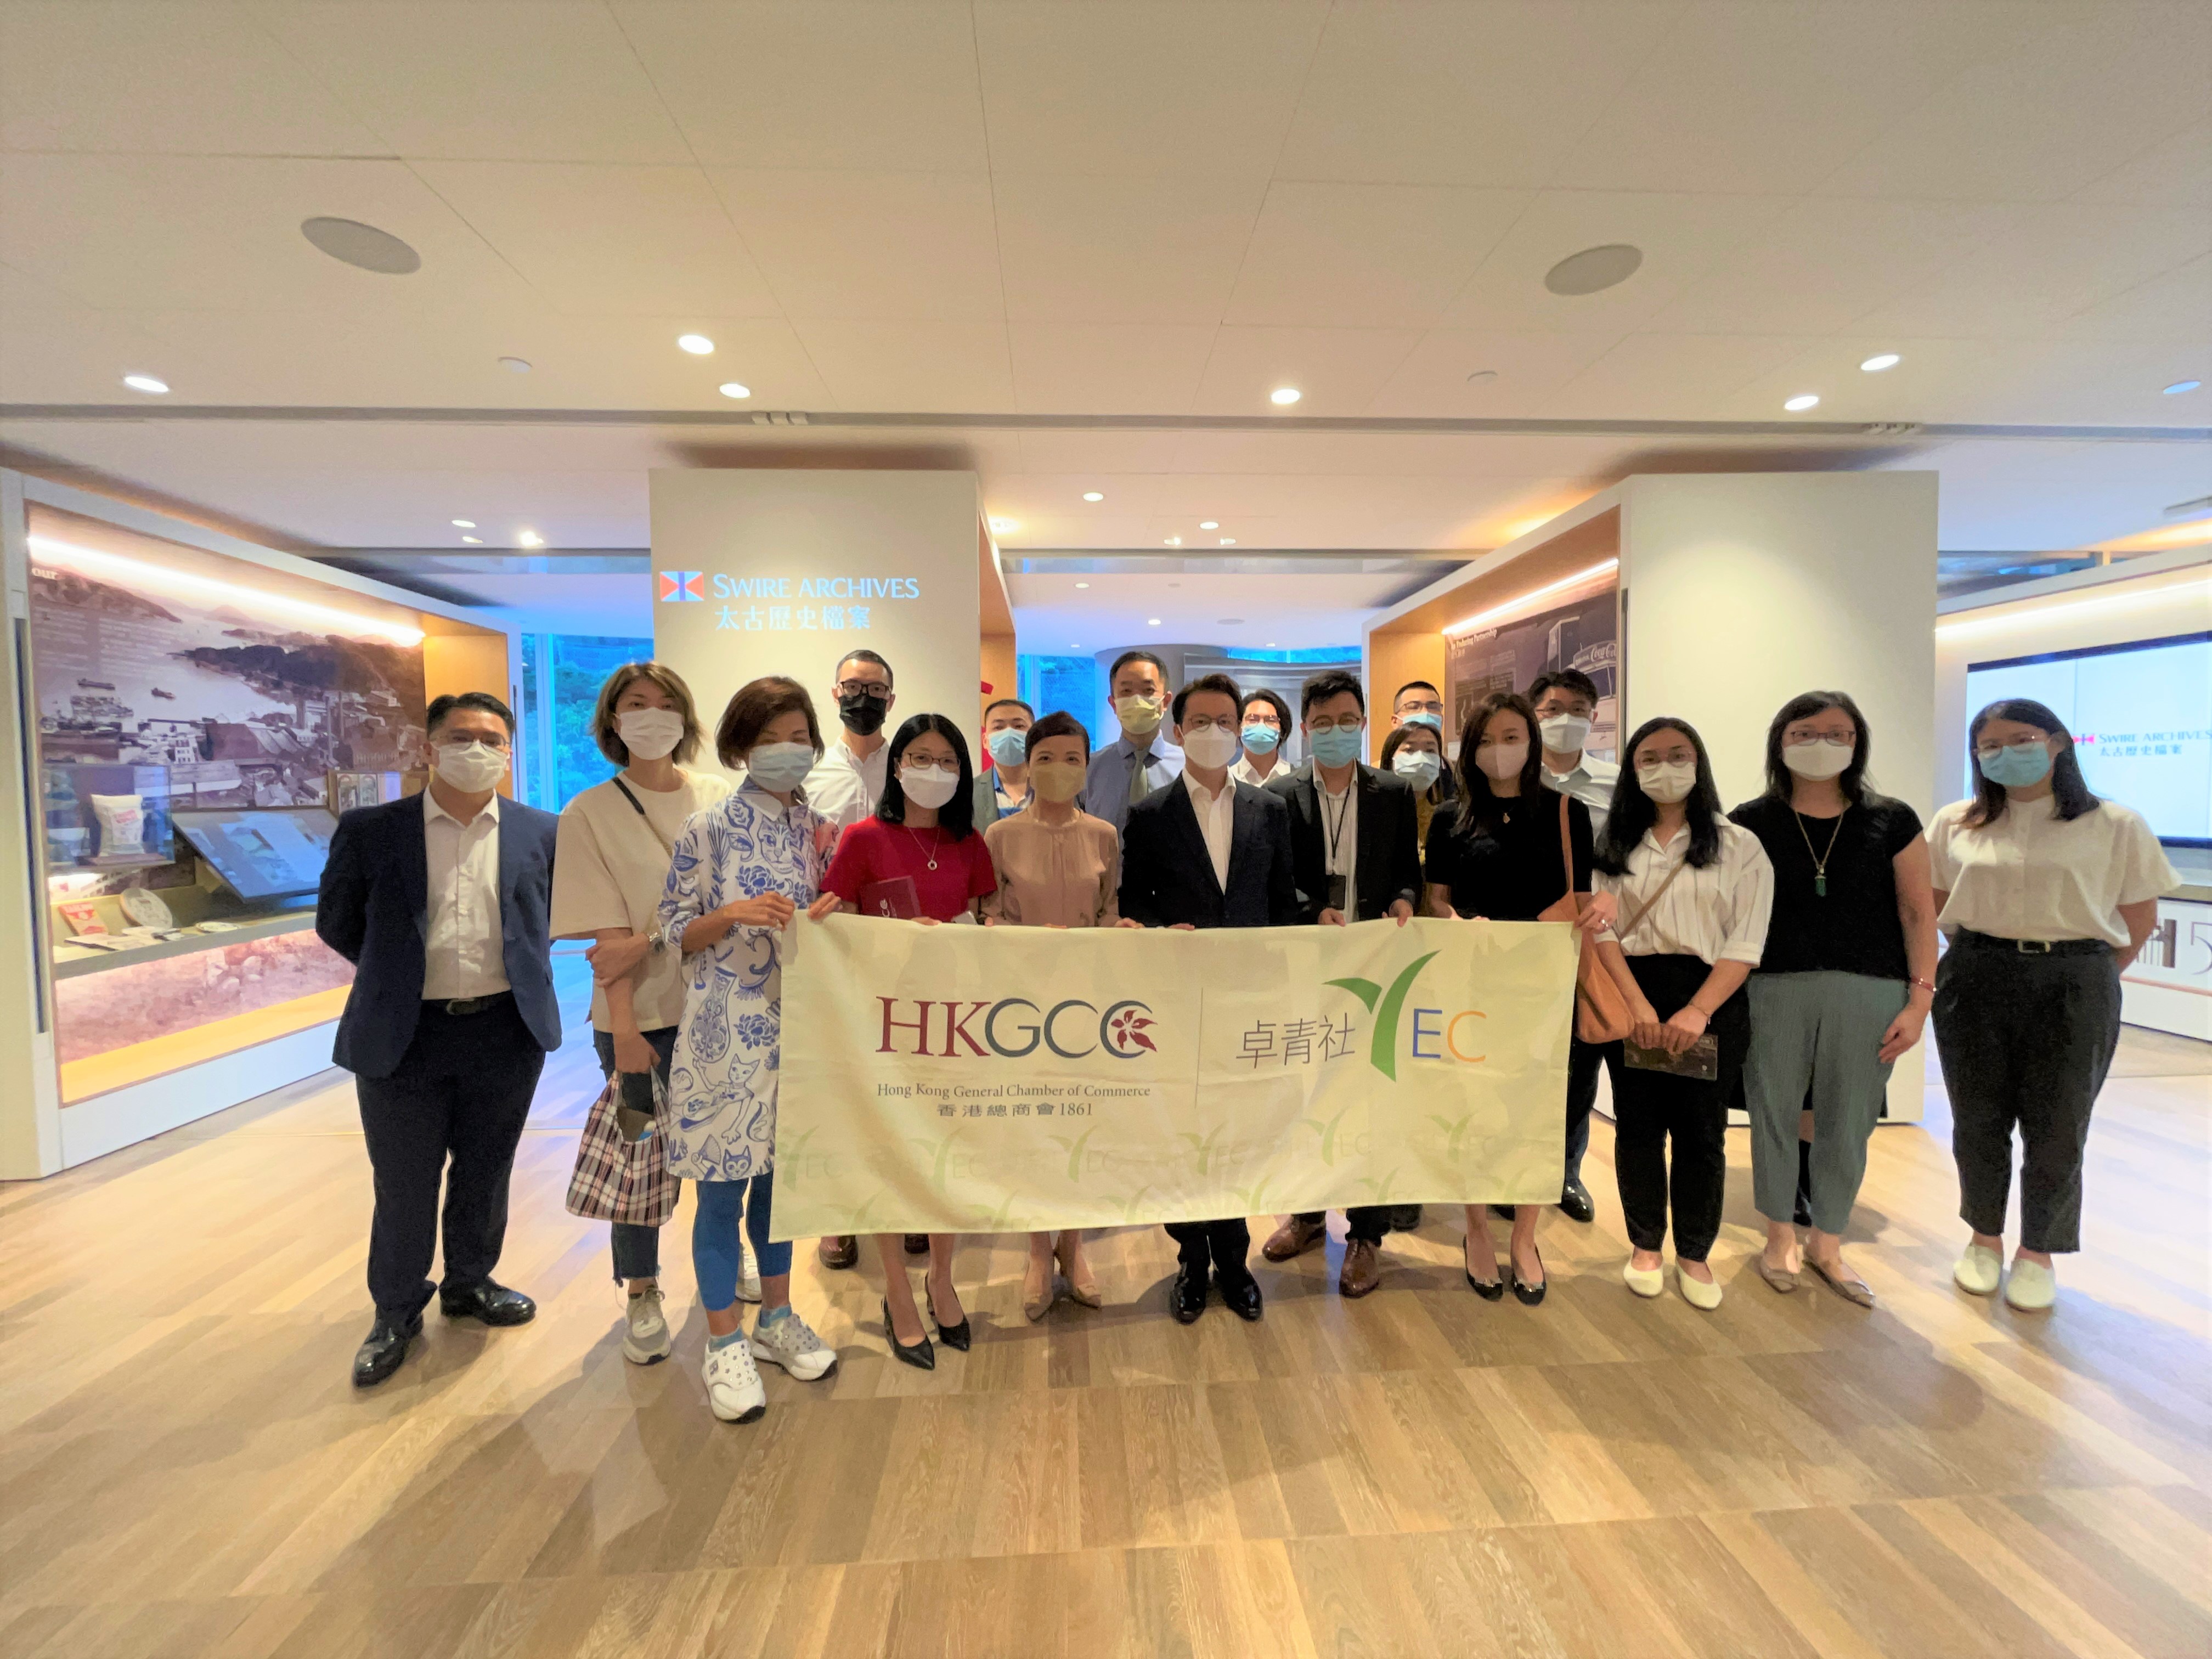 YEC members enjoyed a visit to the Swire Archive Center, on the site of the former Taikoo Sugar Refinery in Quarry Bay, on 23 June.